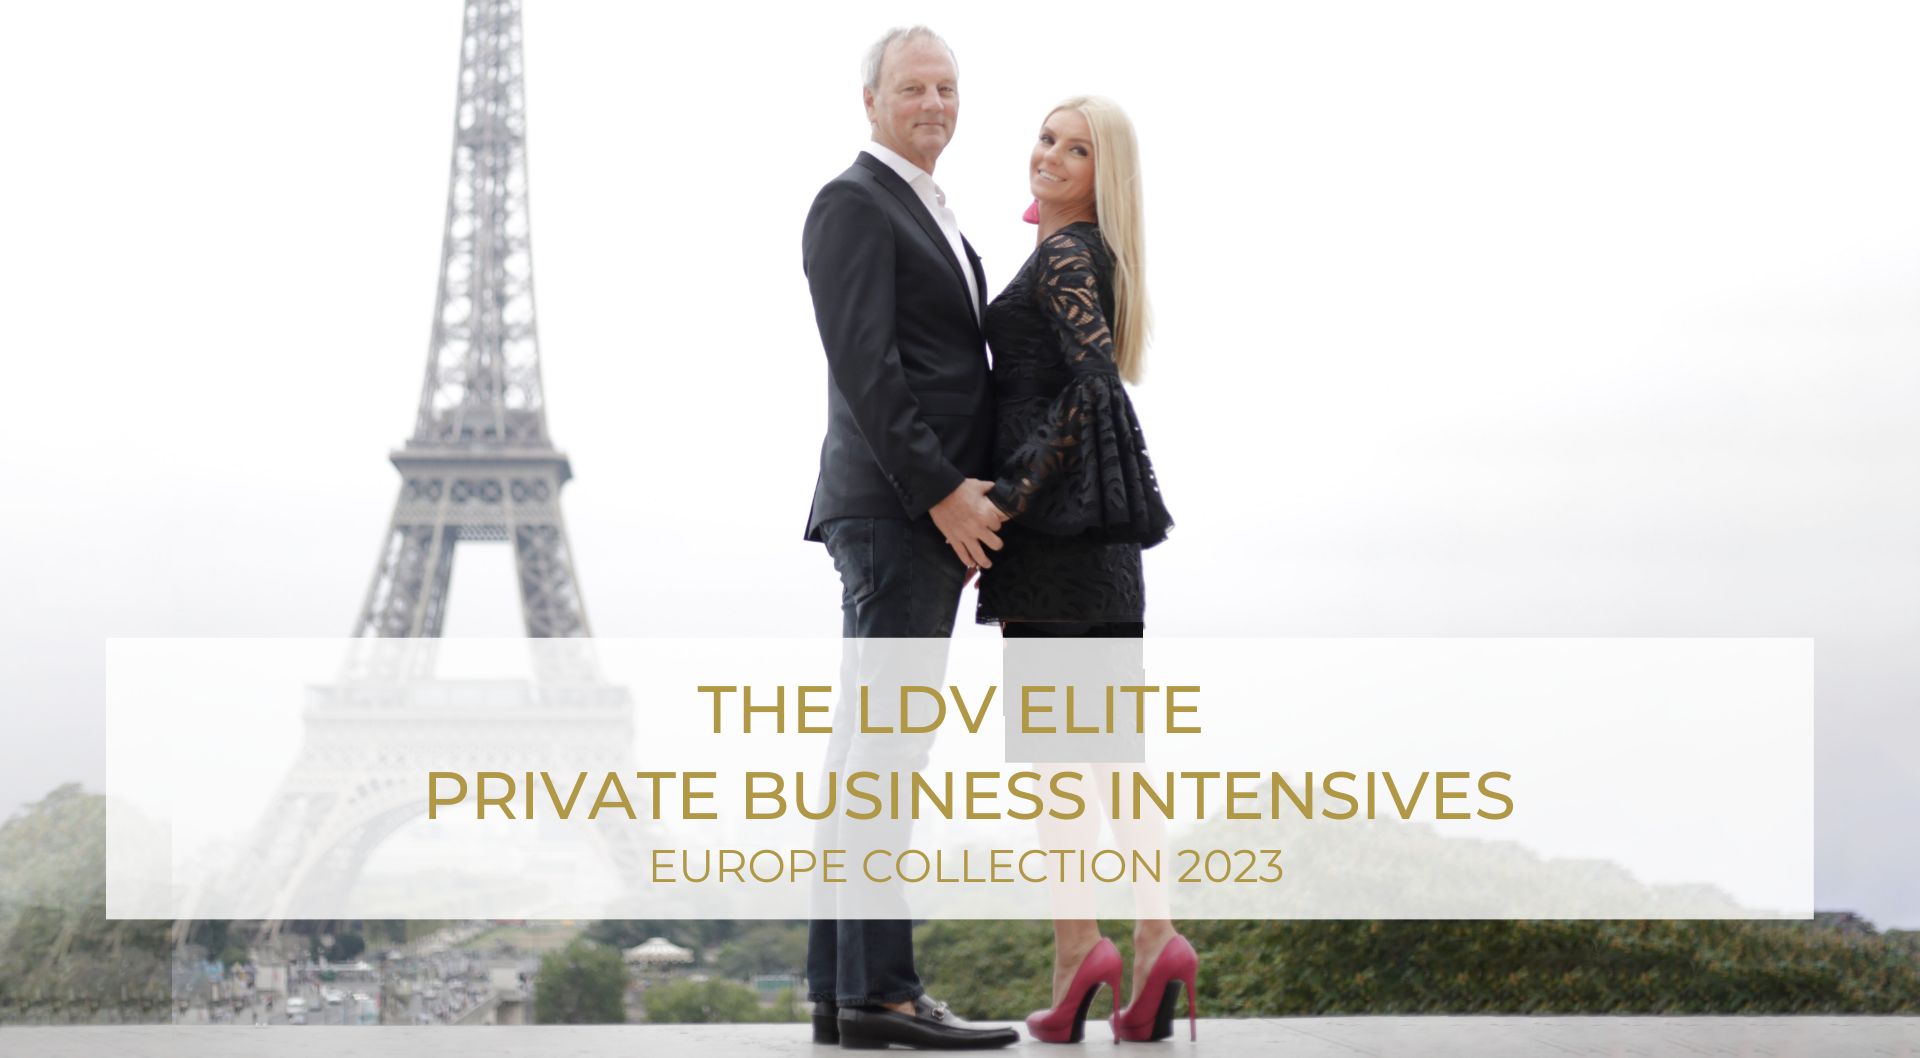 LDV ELITE PRIVATE BUSINESS INTENSIVE EUROPE COLLECTION 2023